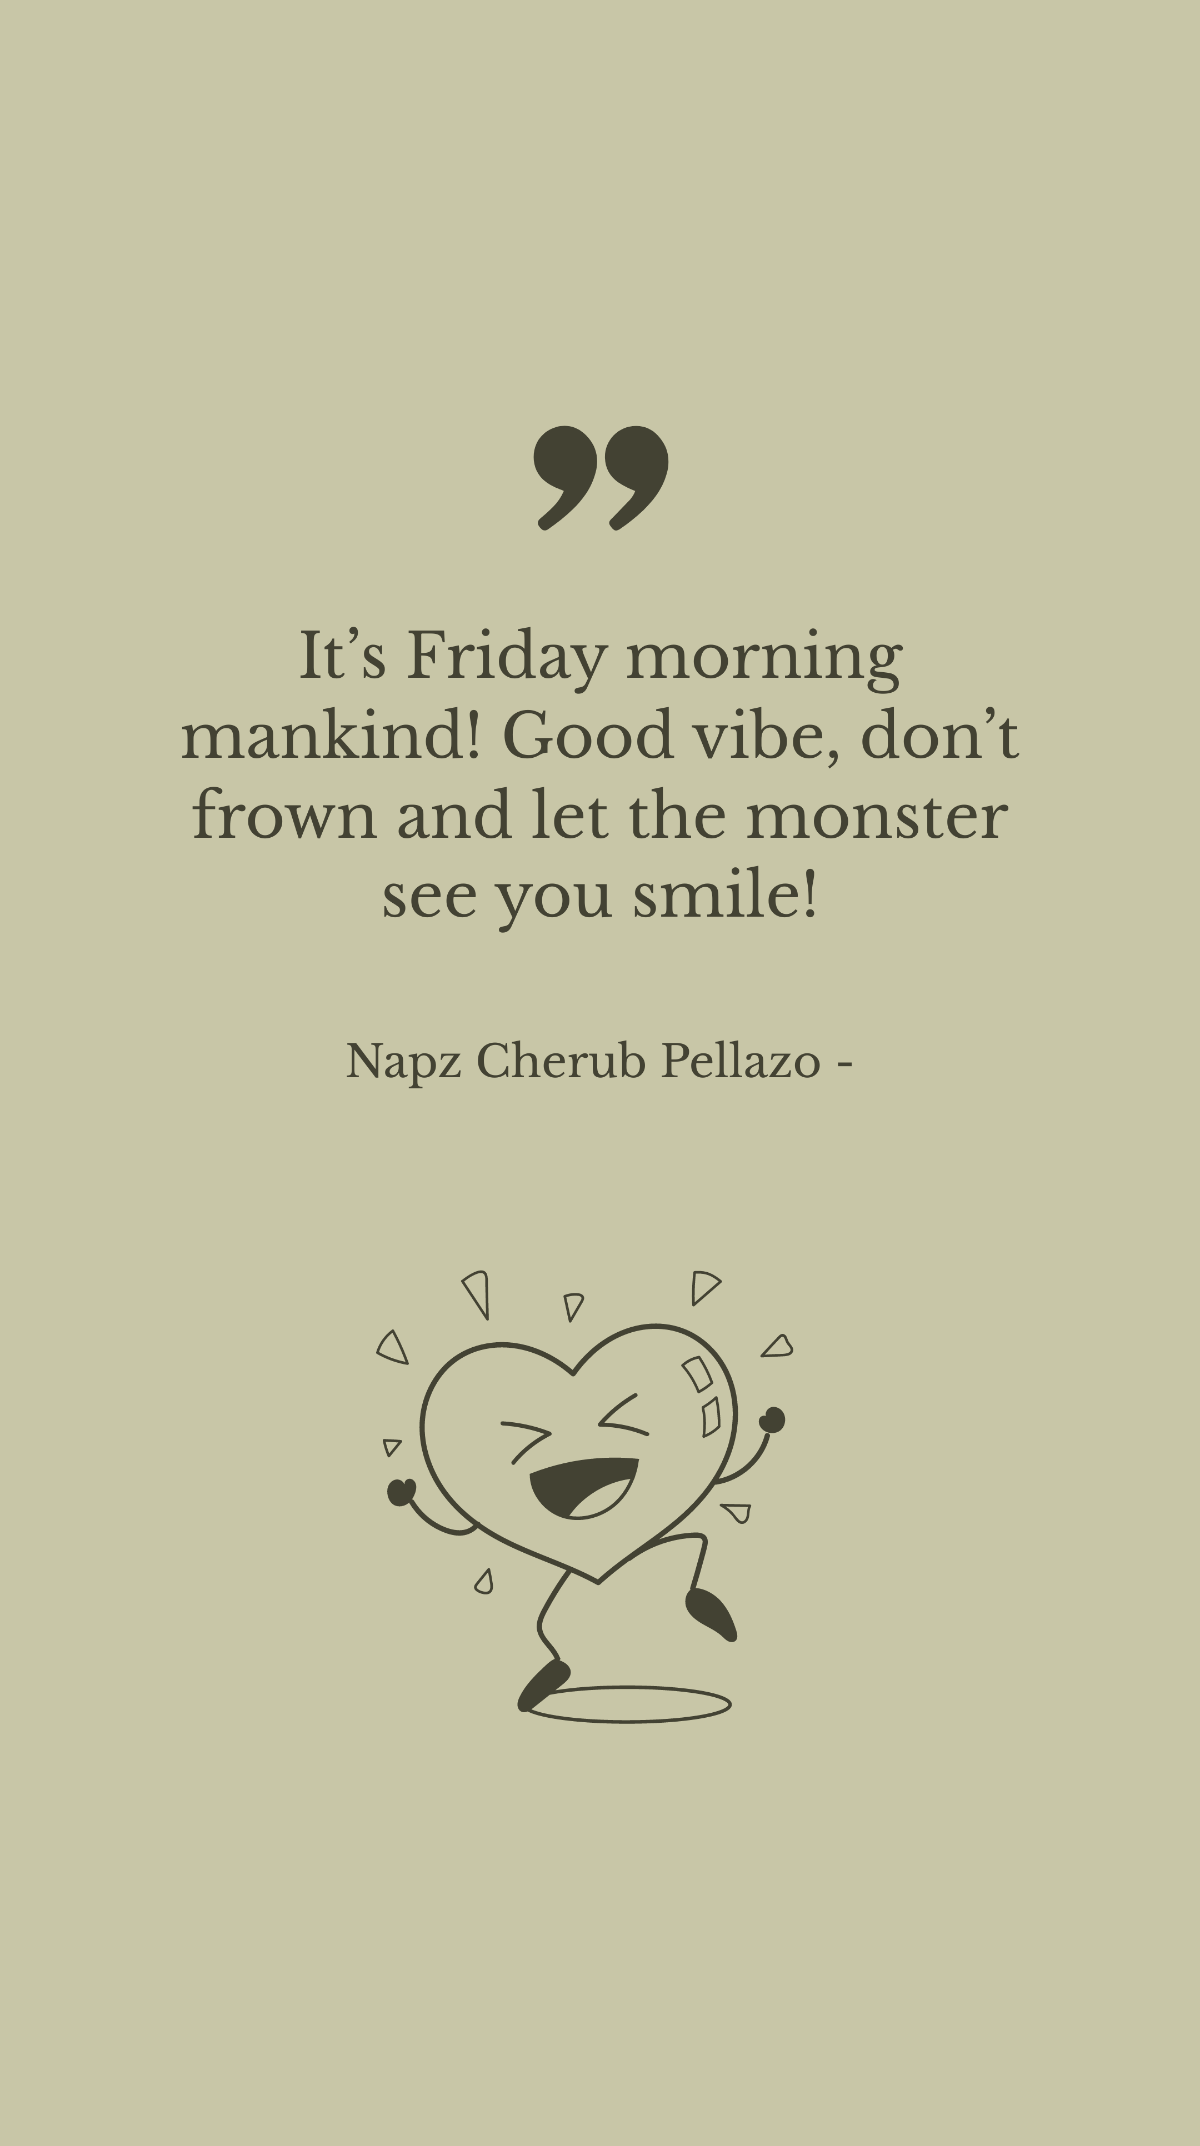 Napz Cherub Pellazo - It’s Friday morning mankind! Good vibe, don’t frown and let the monster see you smile! Template